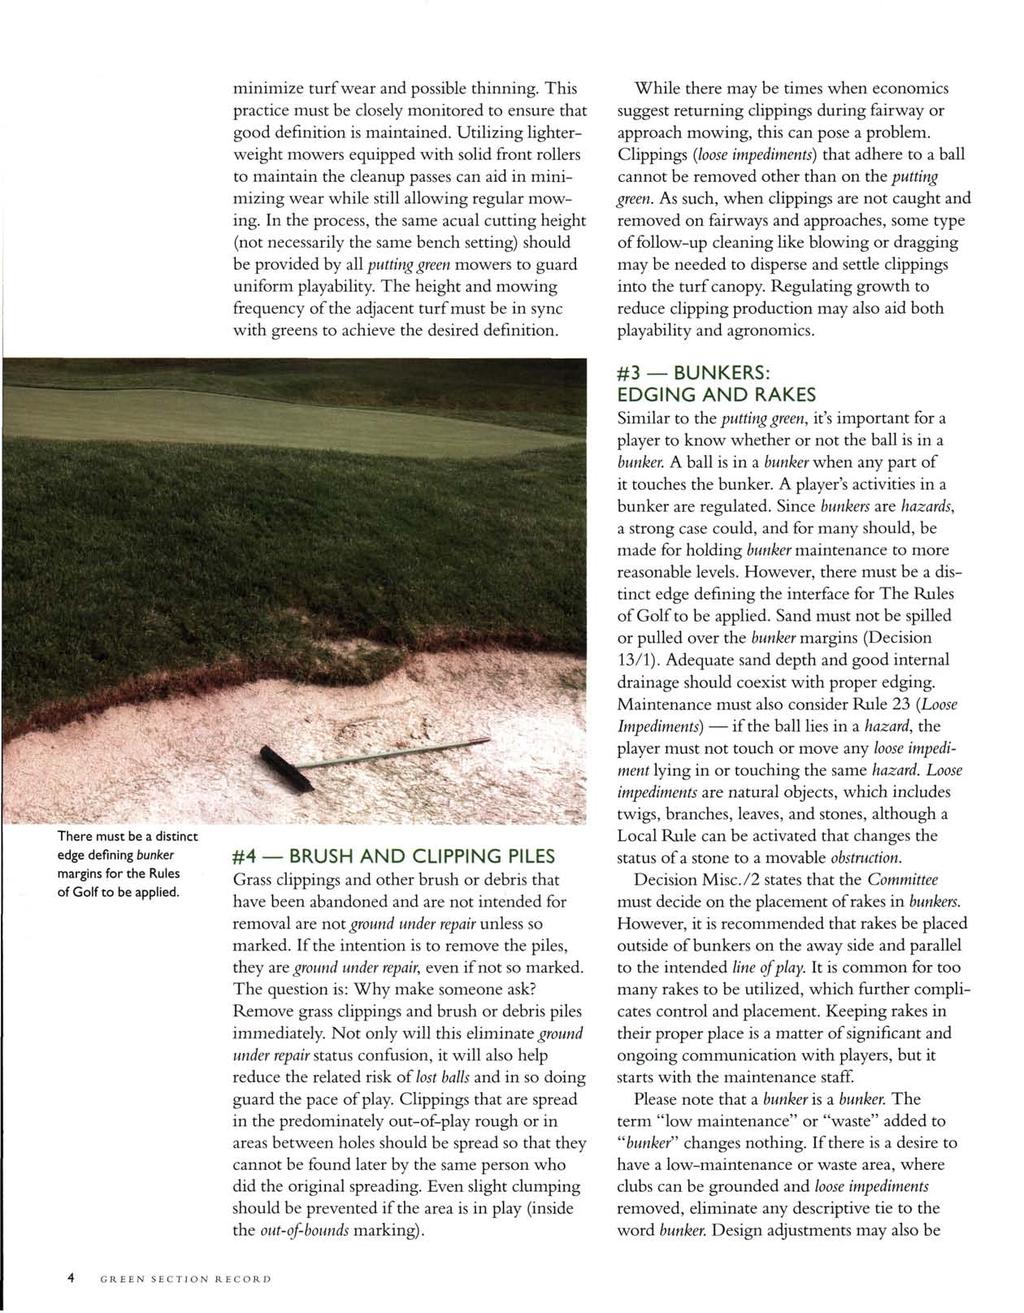 minimize turf wear and possible thinning. This practice must be closely monitored to ensure that good definition is maintained.